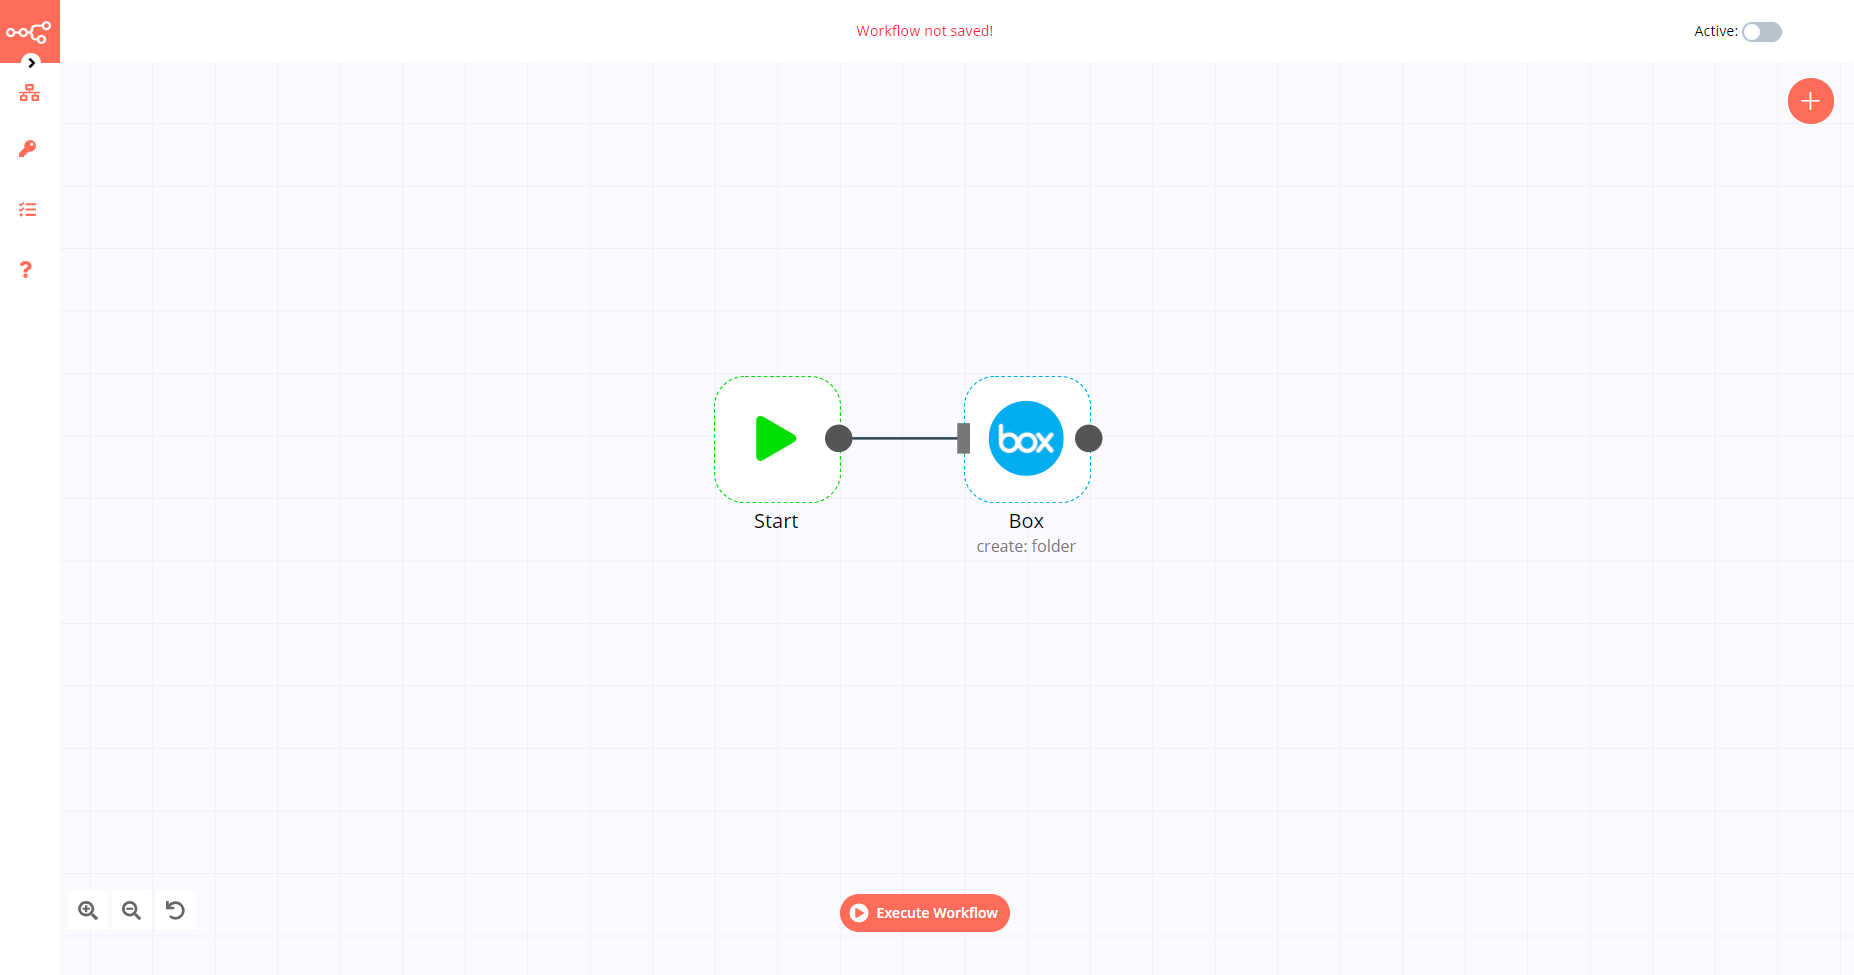 A workflow with the Box node